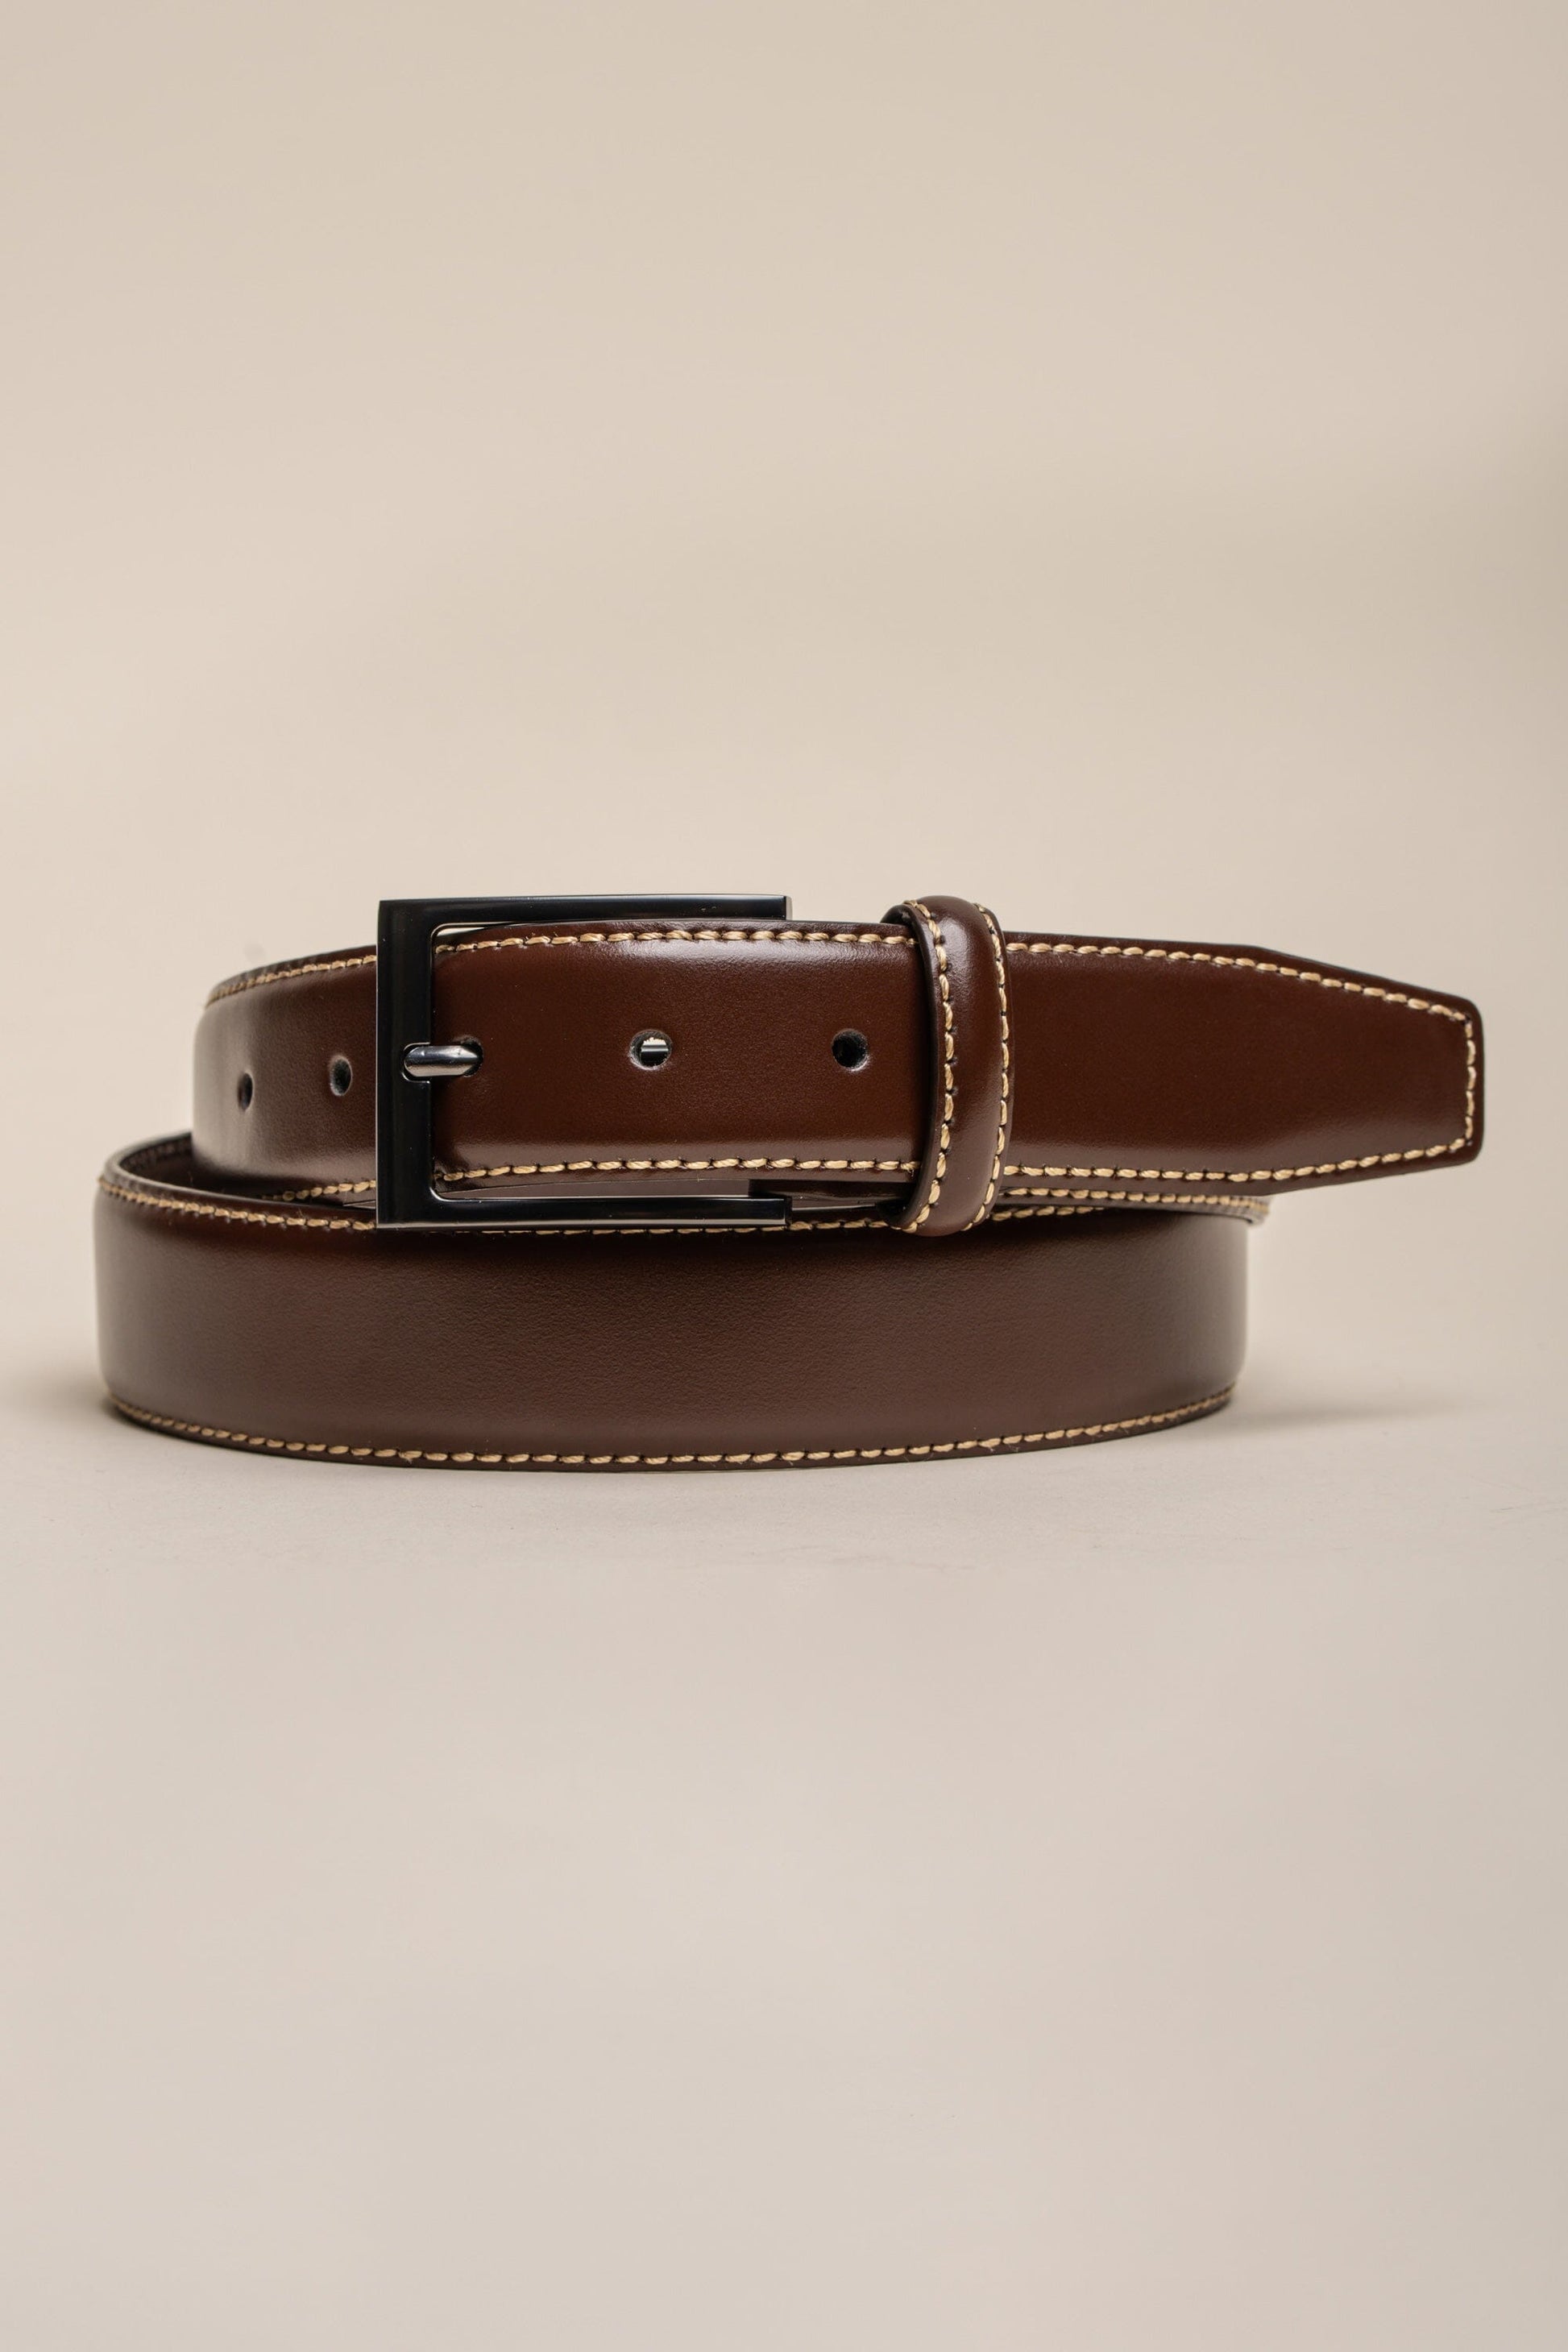 BT04 Belt - Available in 3 colours - Belts - Brown 30" - 32" - THREADPEPPER